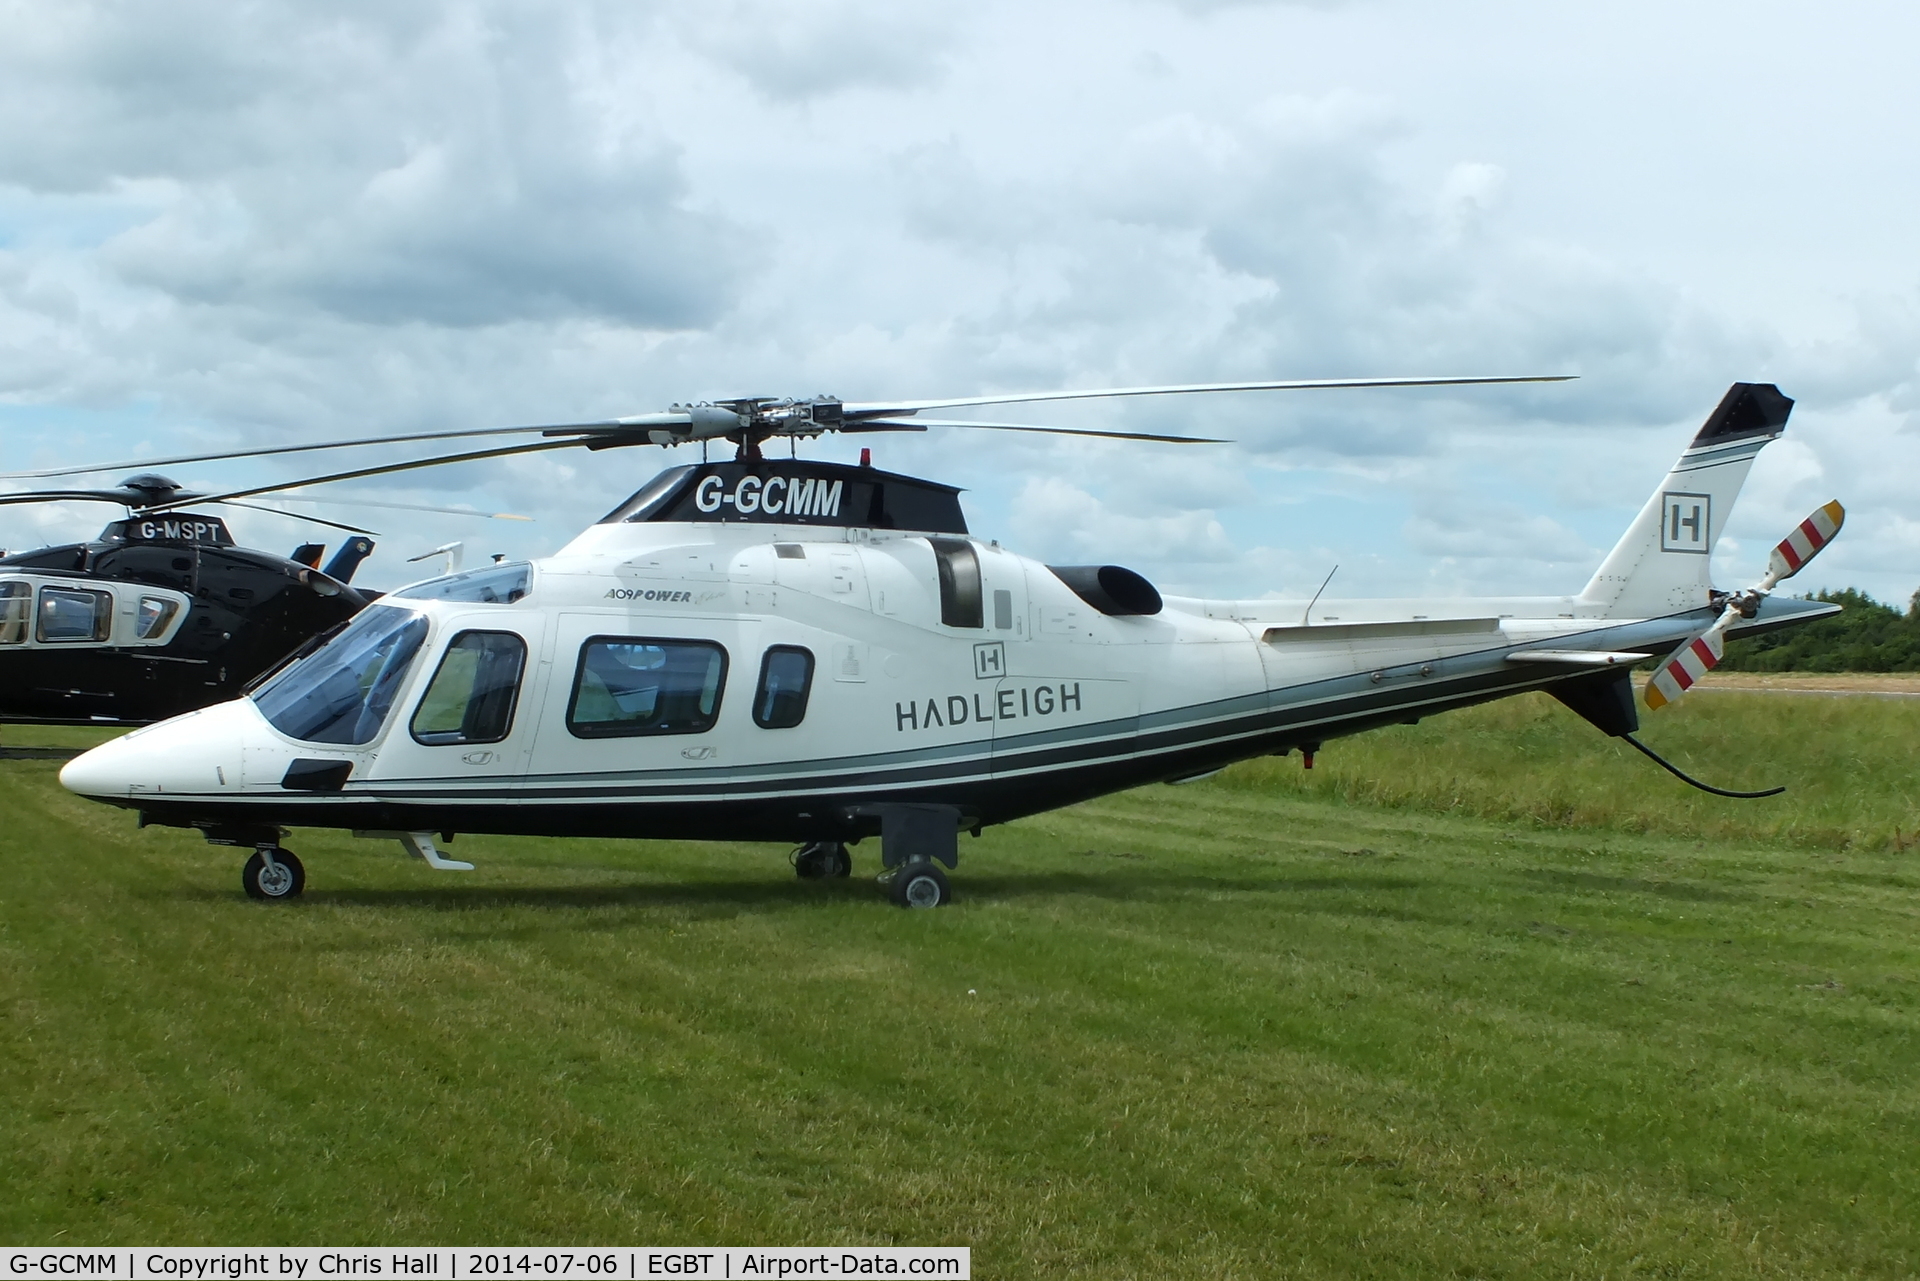 G-GCMM, 2002 Agusta A-109E Power Elite C/N 11158, ferrying race fans to the British F1 Grand Prix at Silverstone